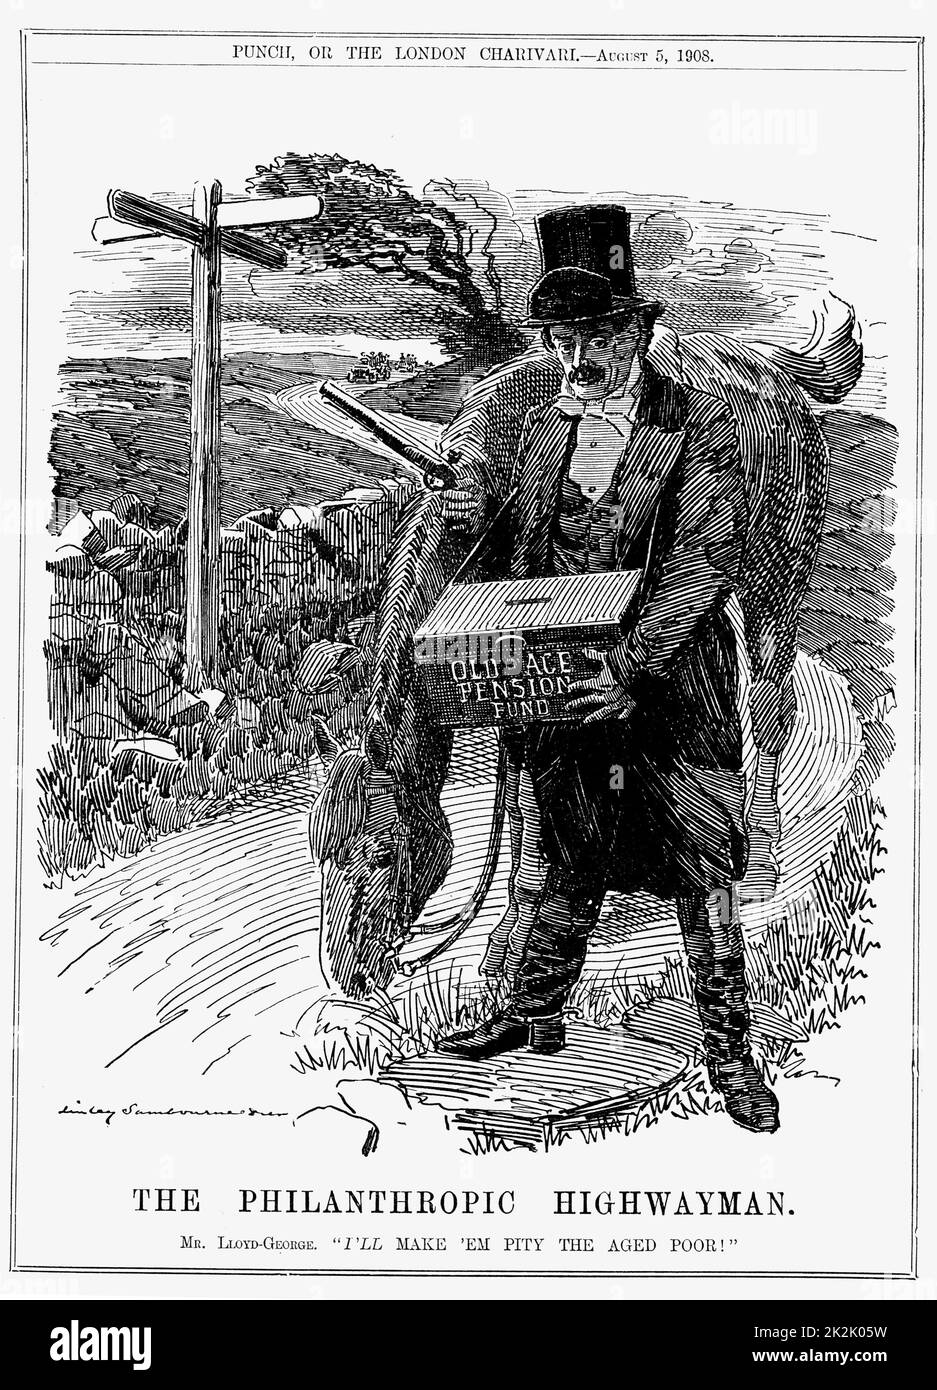 David Lloyd George (1863-1945) Welsh-born British Liberal statesman. In 1908 as Chancellor of the Exchequer Lloyd George introduced the Old Age Pensions Act. Cartoon by Edward Linley Sambourne from 'Punch', London,  August 1908. Stock Photo